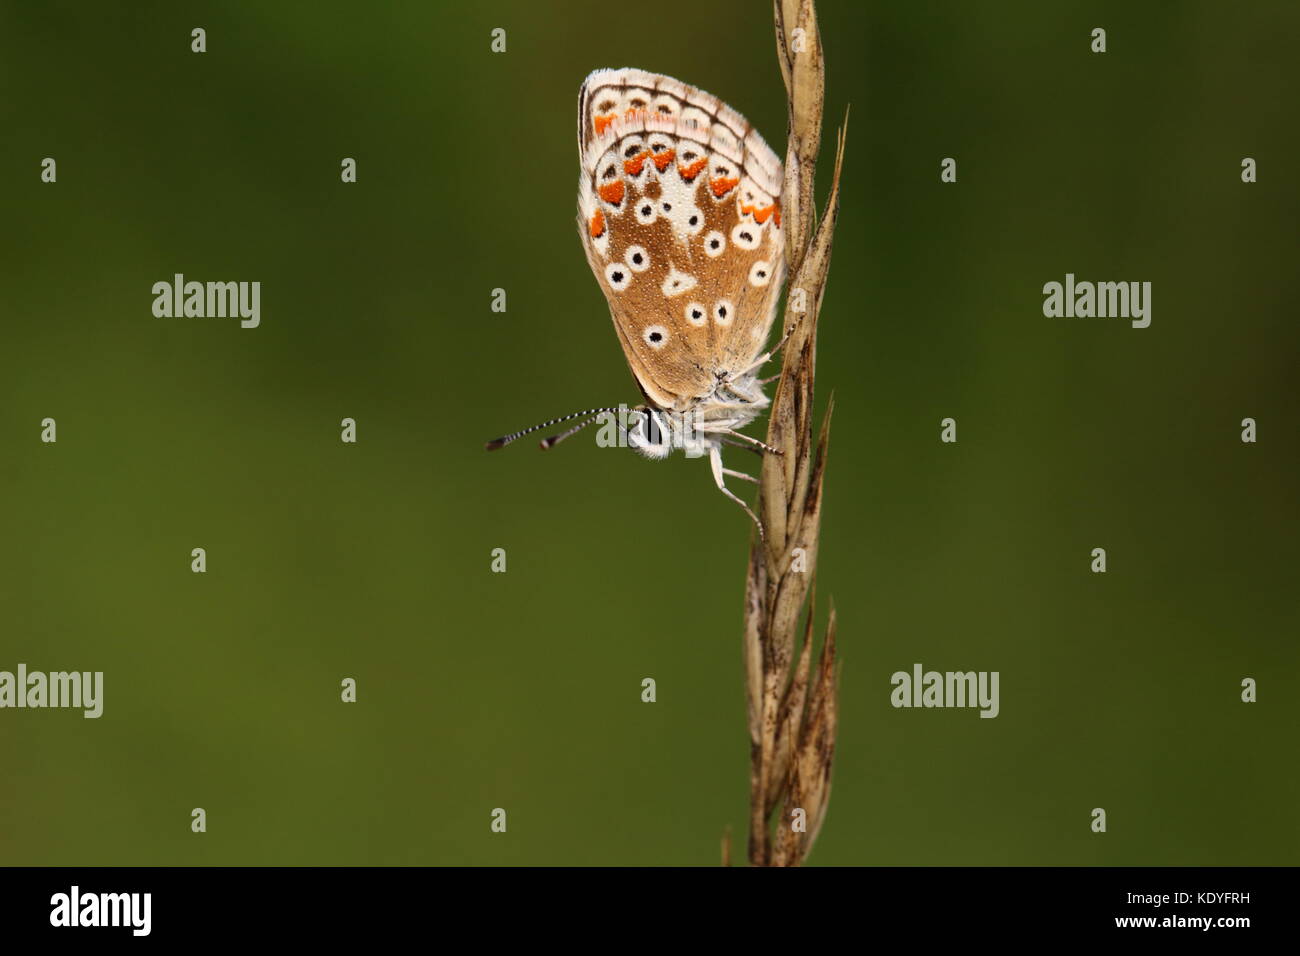 Roosting Brown Argus butterfly Stock Photo